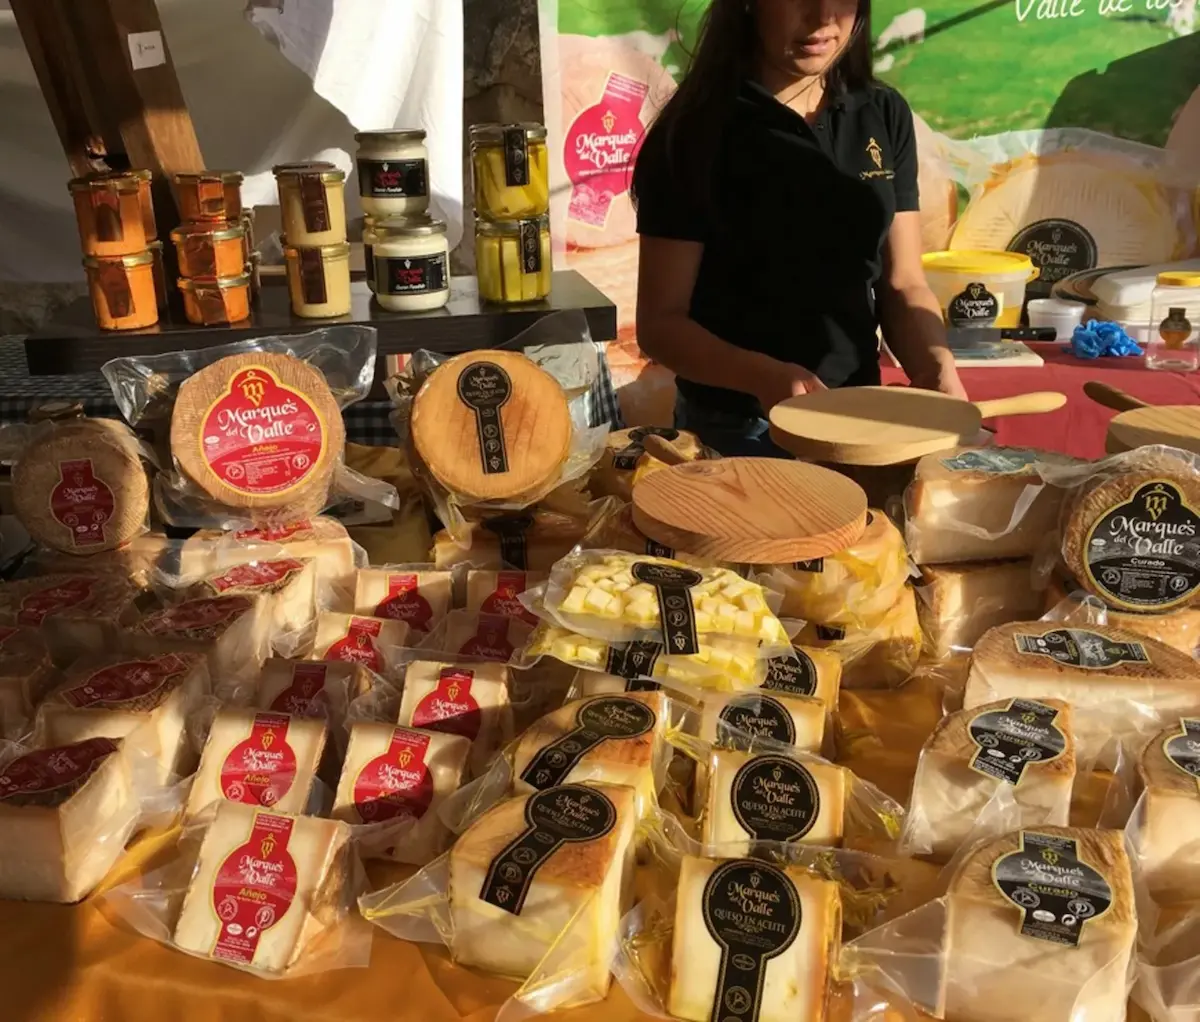 The Artisan Cheese Fair is held annually, with various activities